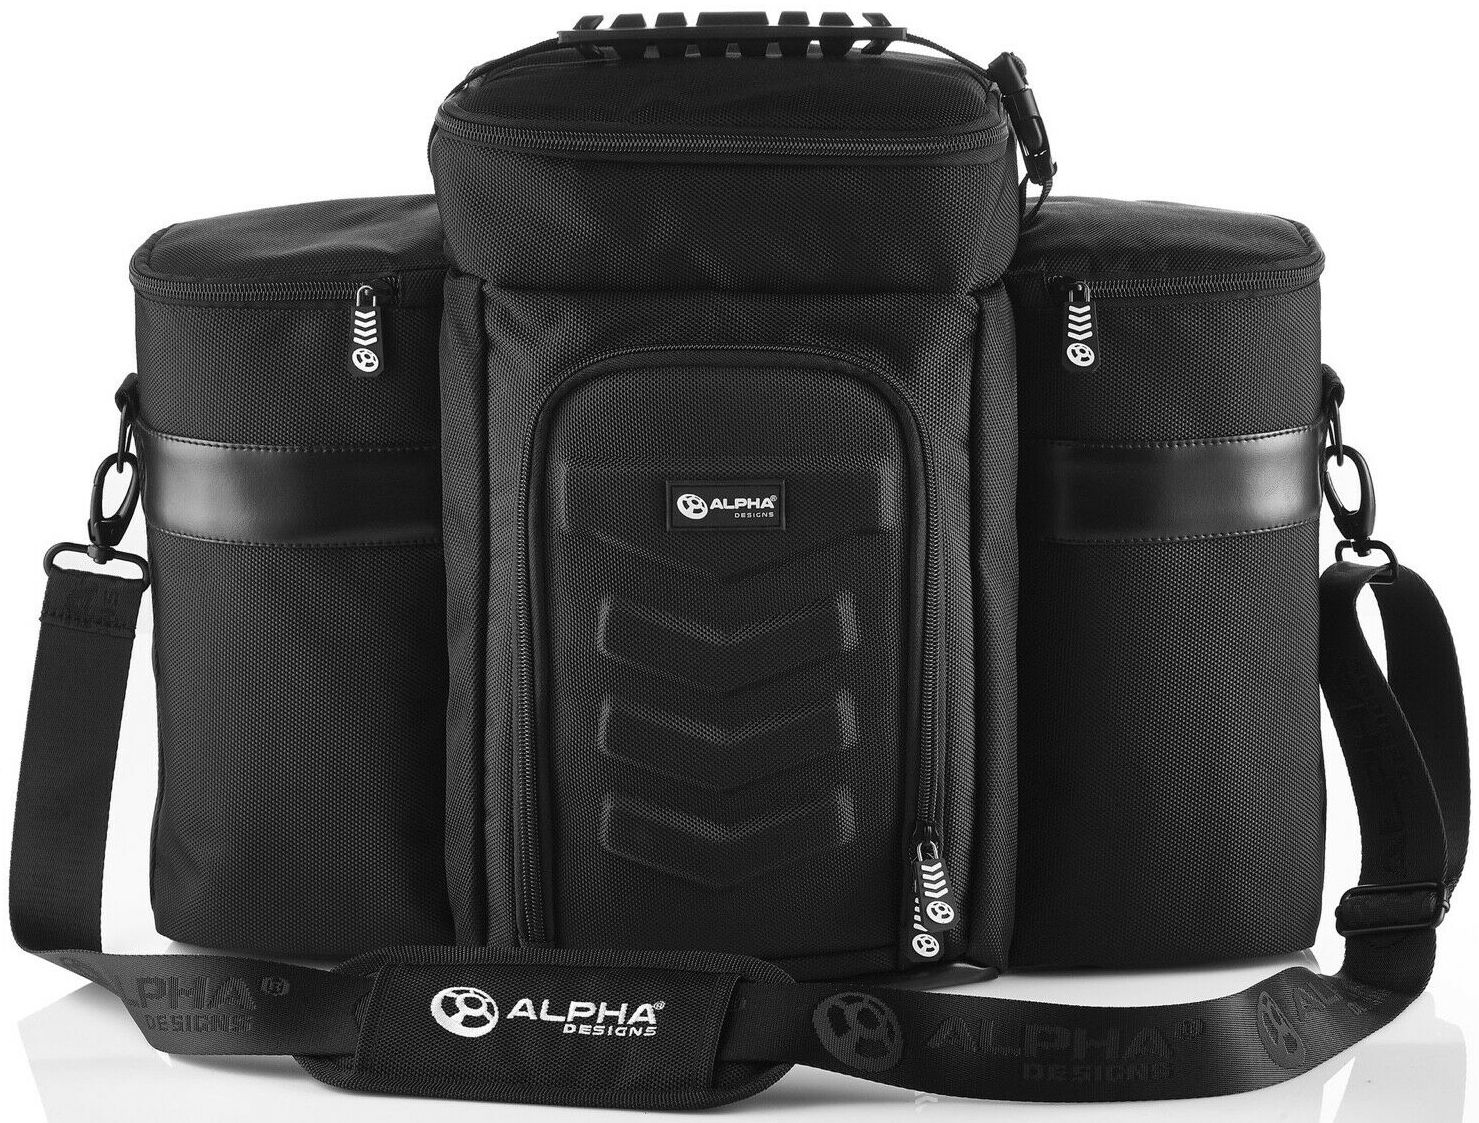 Adapt Designs Meal System - Fully Loaded, Black